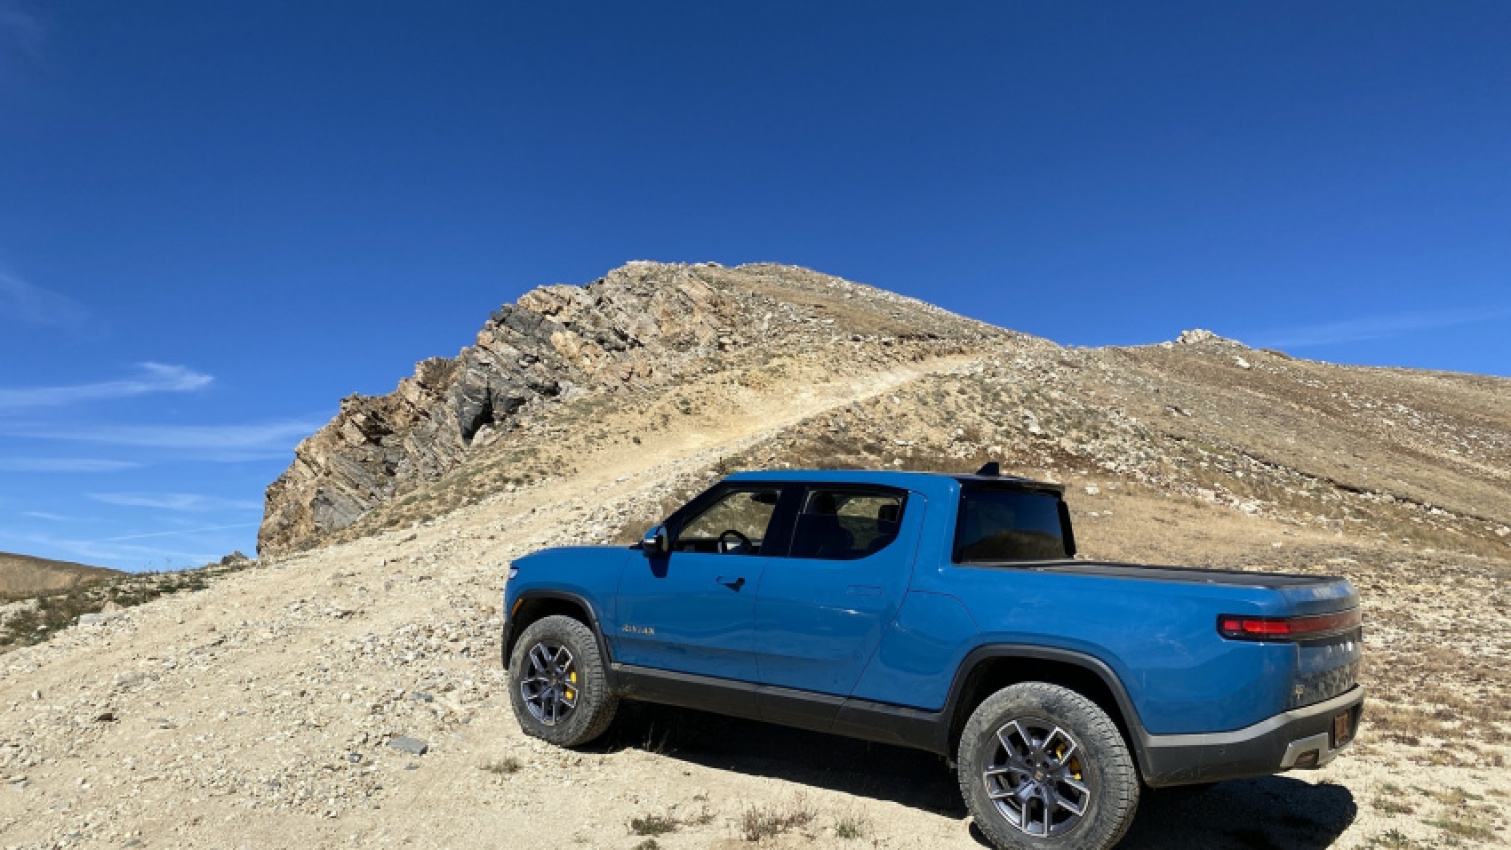 autos, cars, rivian, electric cars, first drives, rivian news, rivian r1t news, first drive review: 2022 rivian r1t shines as the north star of utility vehicles